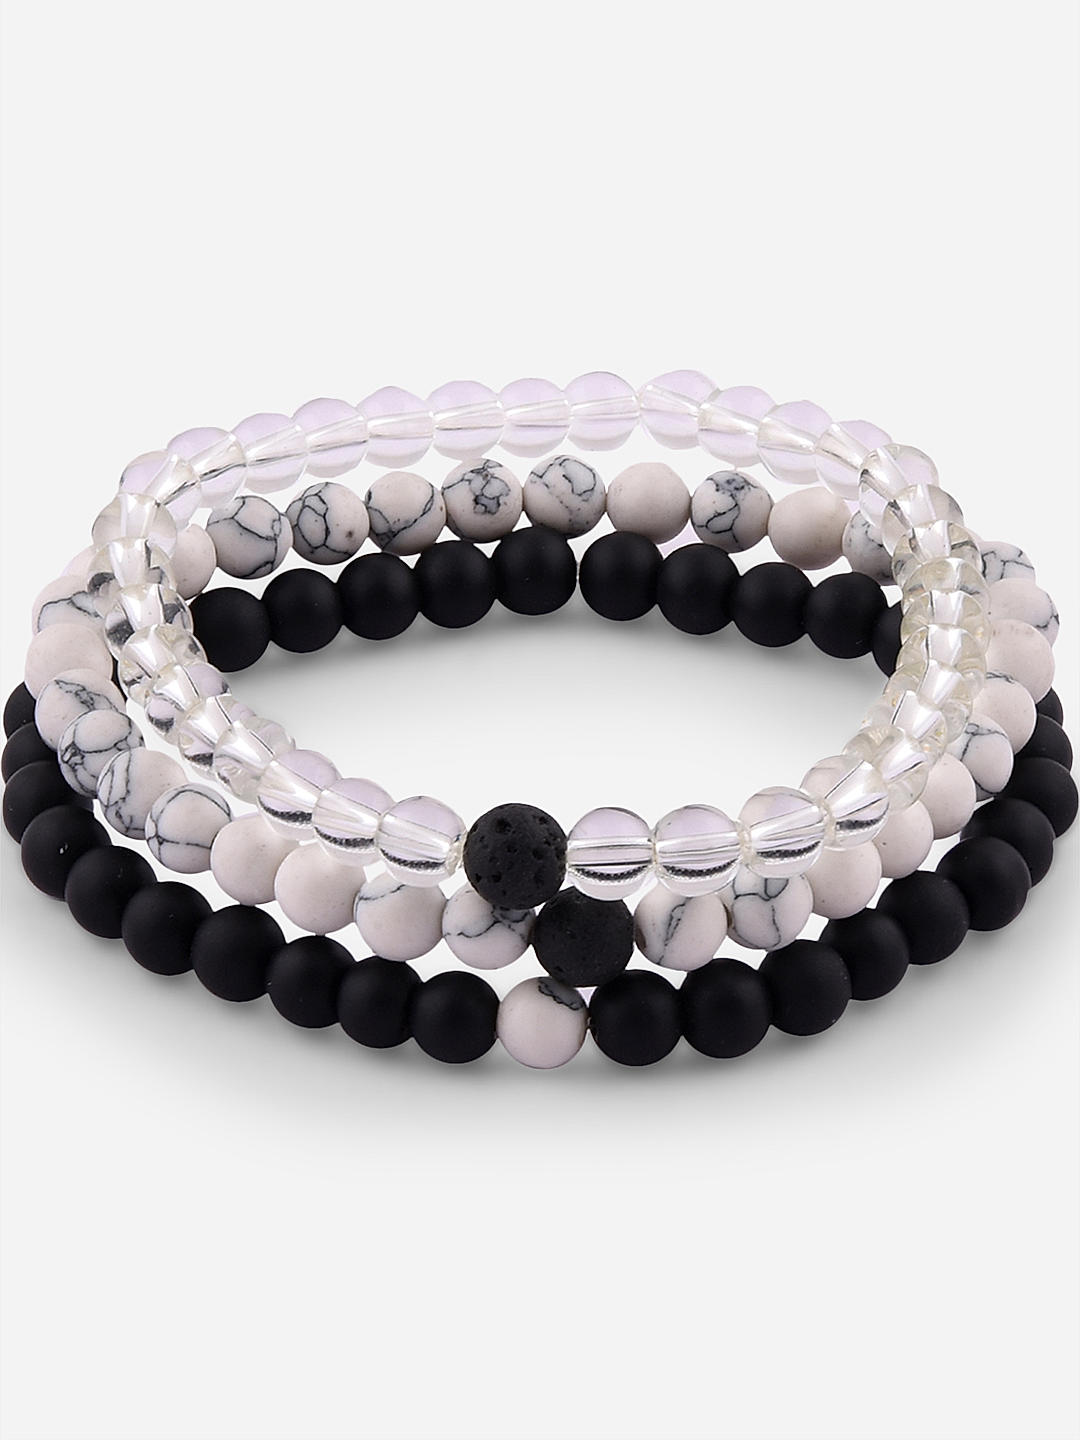 Set of Three Beaded Stretch Bracelets Featuring Semi Precious Natural Stone  and Heishi Beads - Approximately 3